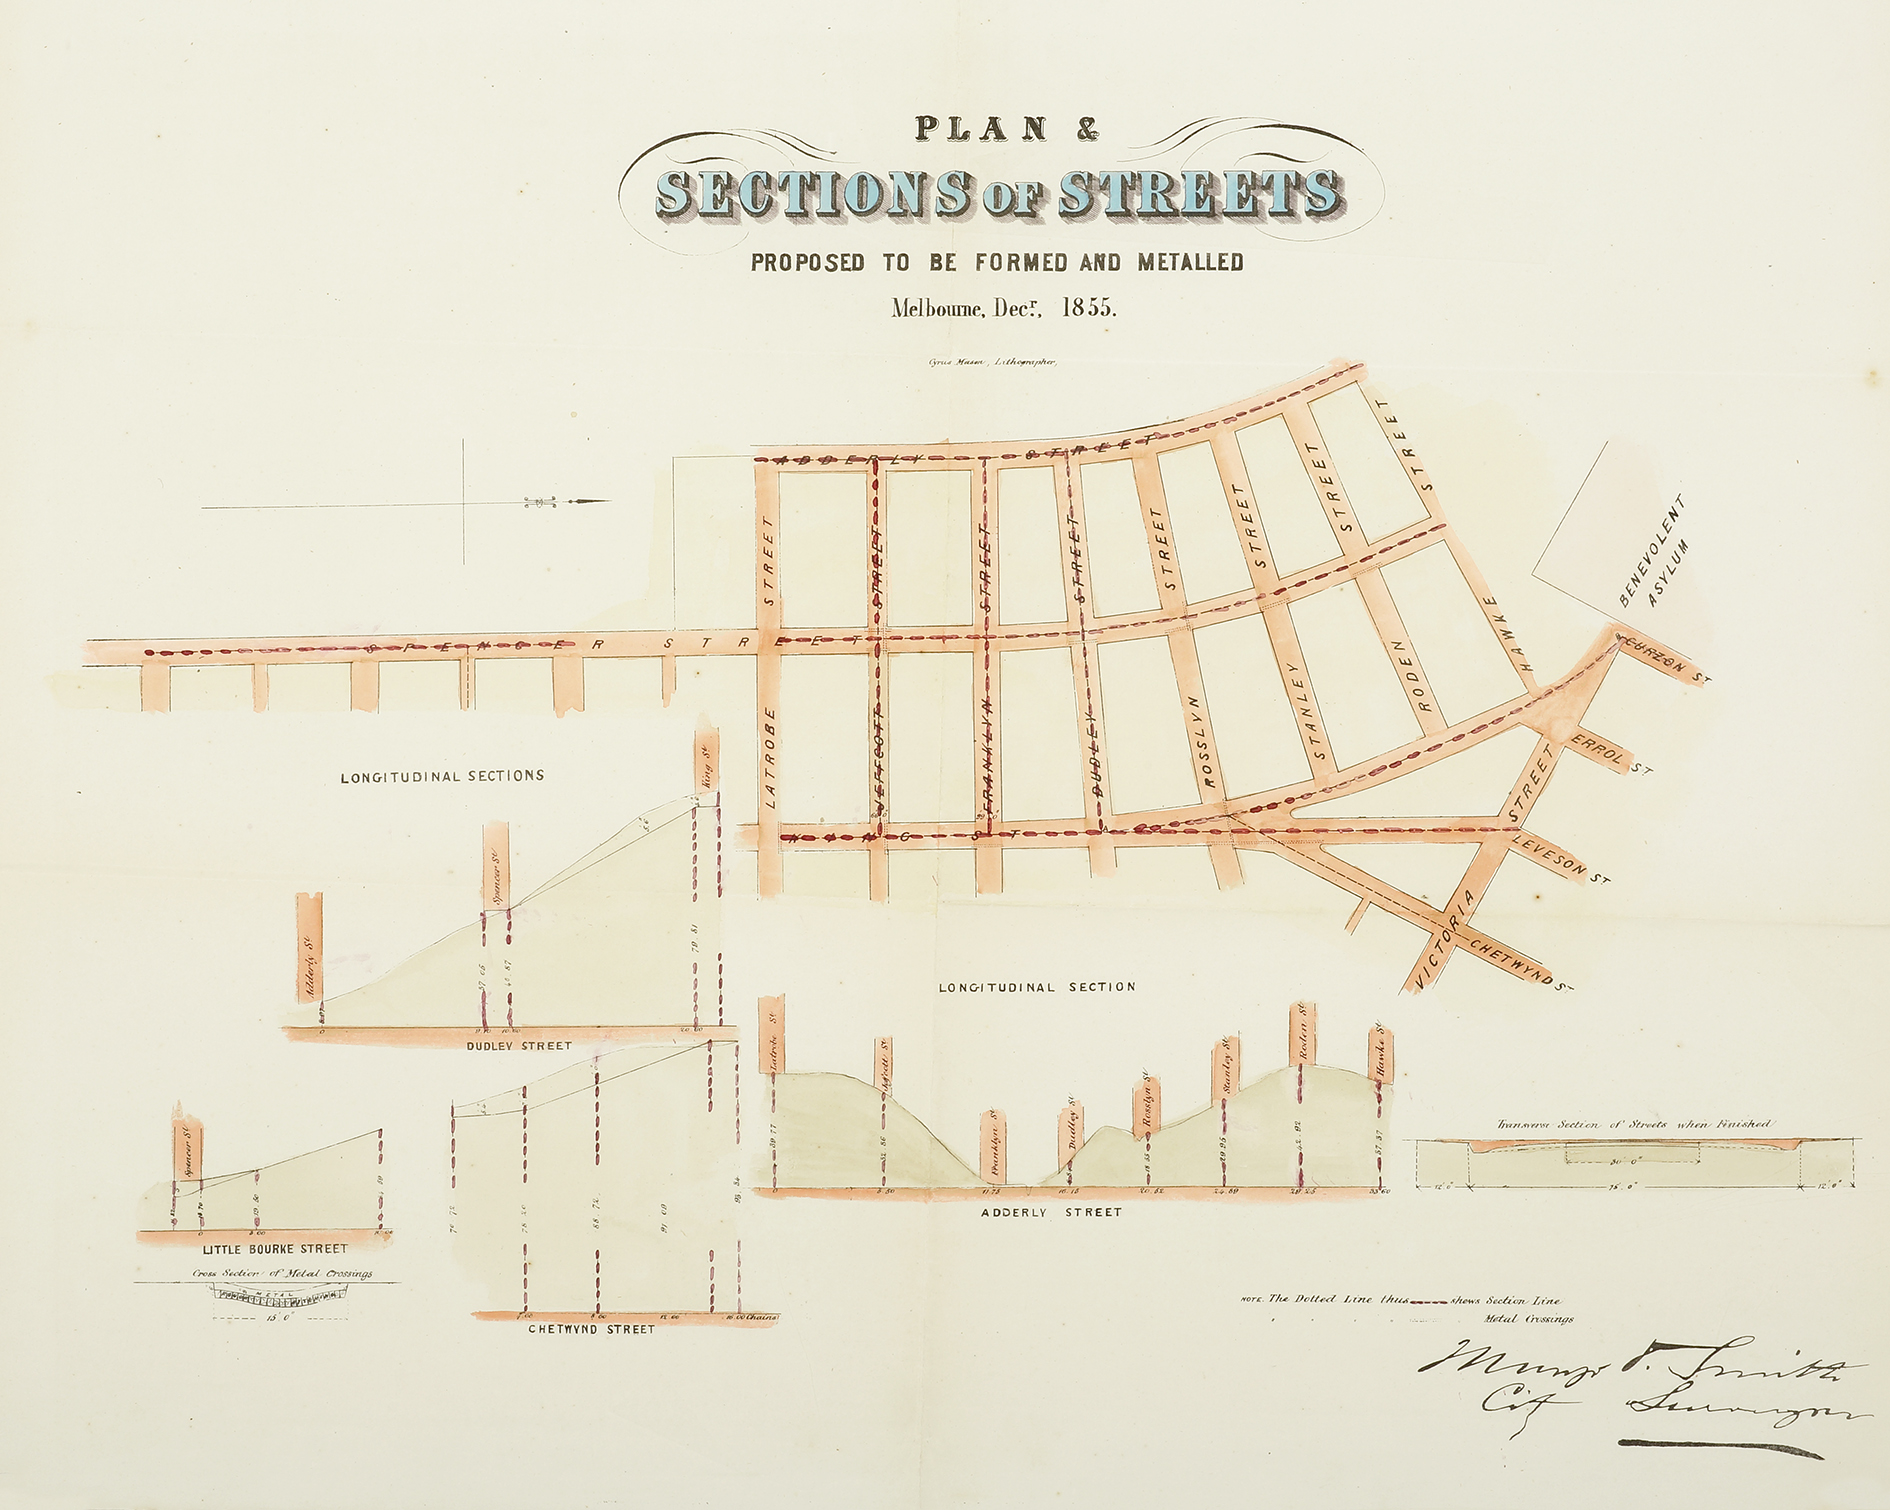 [MELBOURNE] Plan & Sections of Streets Proposed to be Formed and Metalled Melbourne. Decr. 1855. - Antique Map from 1856